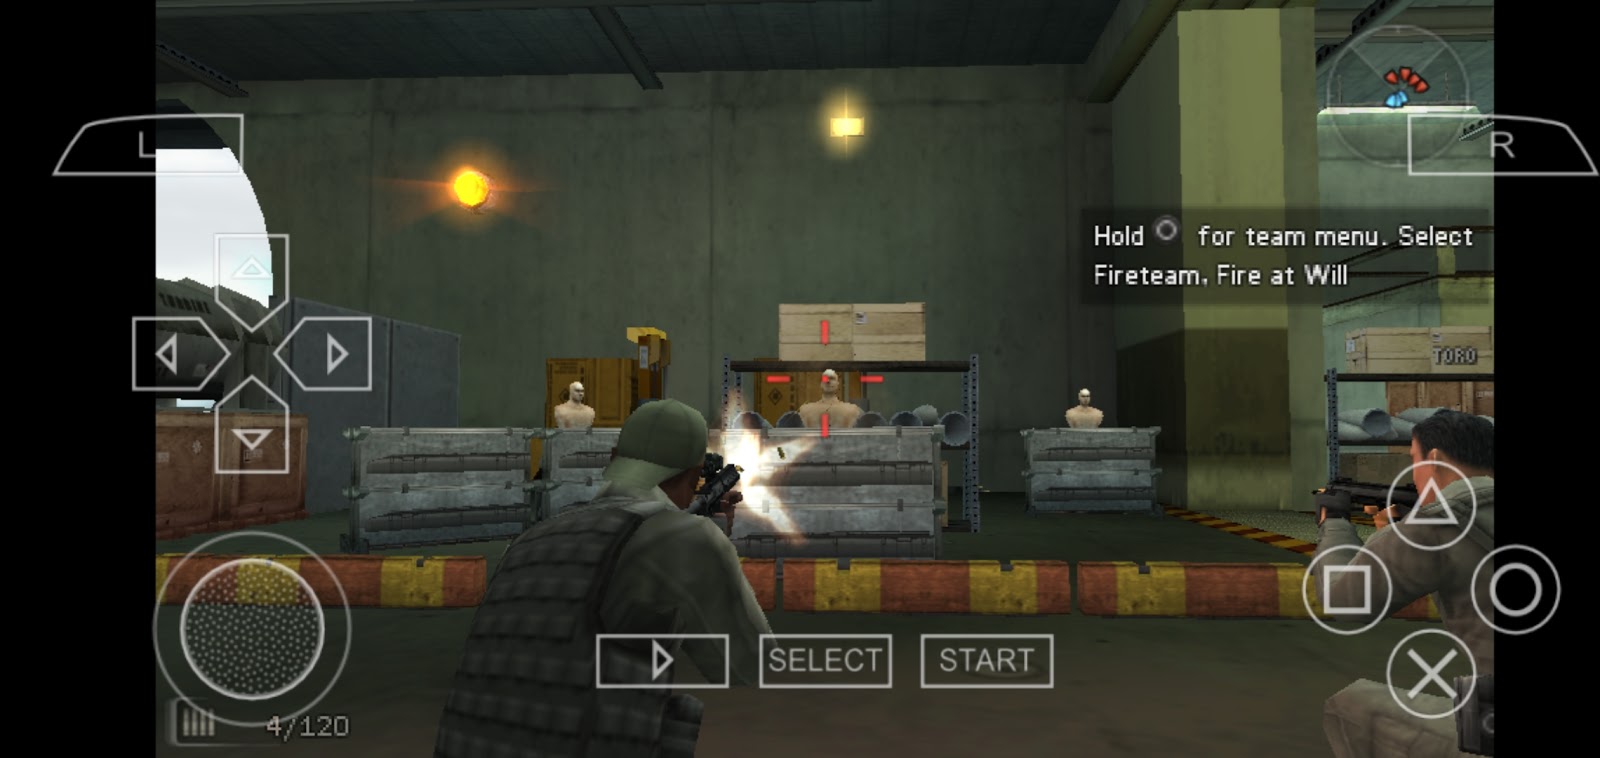 Socom U S Navy Seals Fireteam Bravo 3 Psp Iso Ppsspp Free Download Free Download Psp Ppsspp Games Android Games